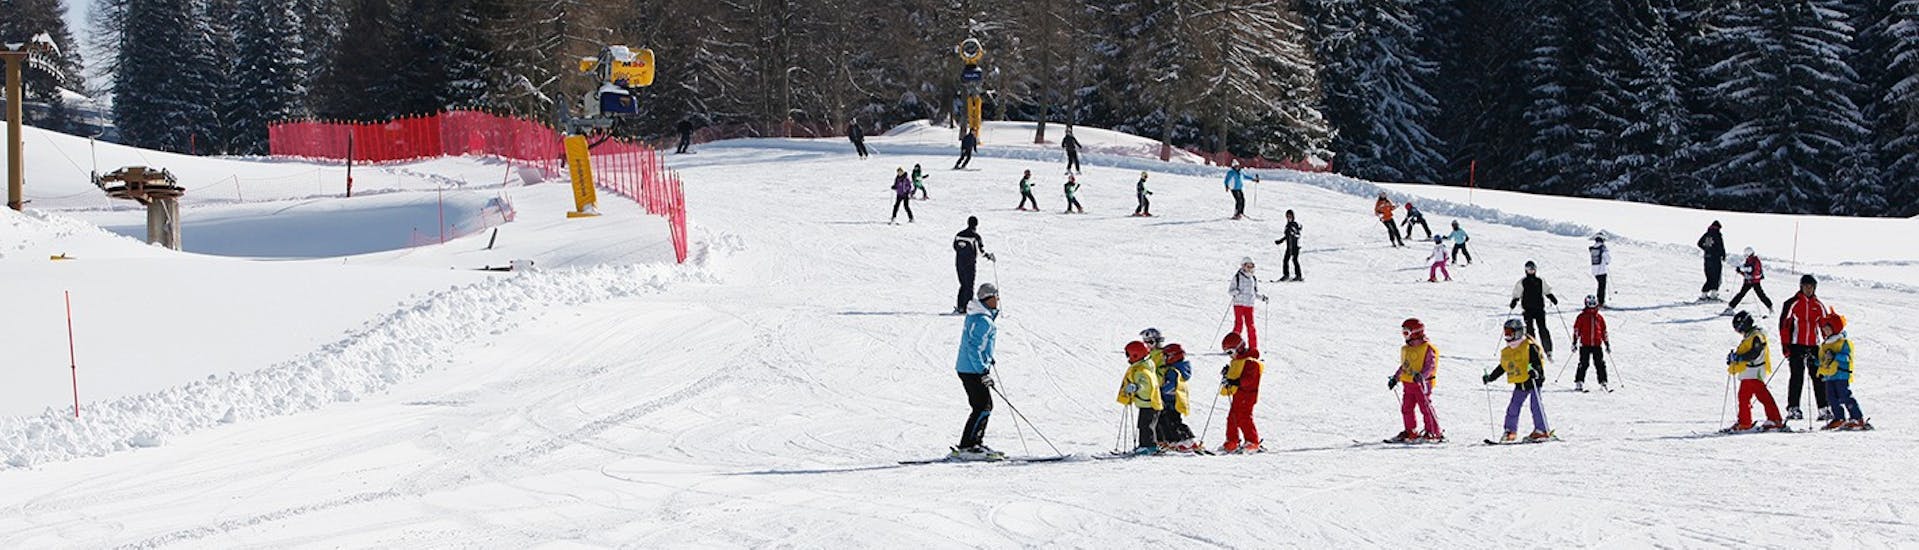 Kids Ski Lessons (6-14 y.) for All Levels - Half Day.